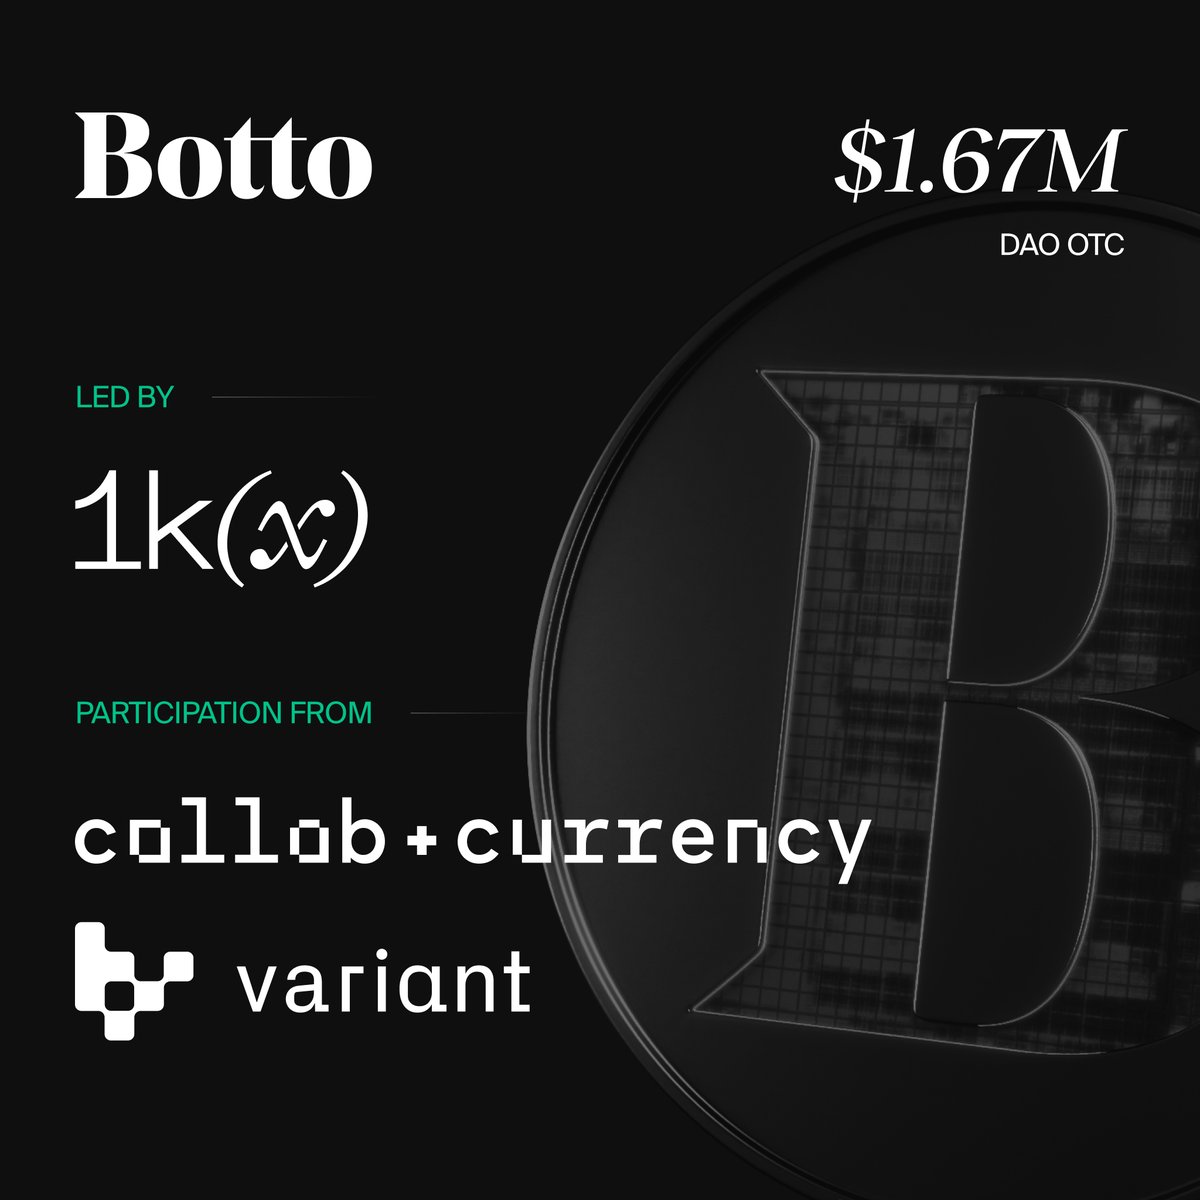 BottoDAO is thrilled to announce a $1.67M raise through treasury OTC transactions, led by @1kxnetwork, with @Collab_Currency and @VariantFund participating. This marks a significant step in @bottoproject's journey.